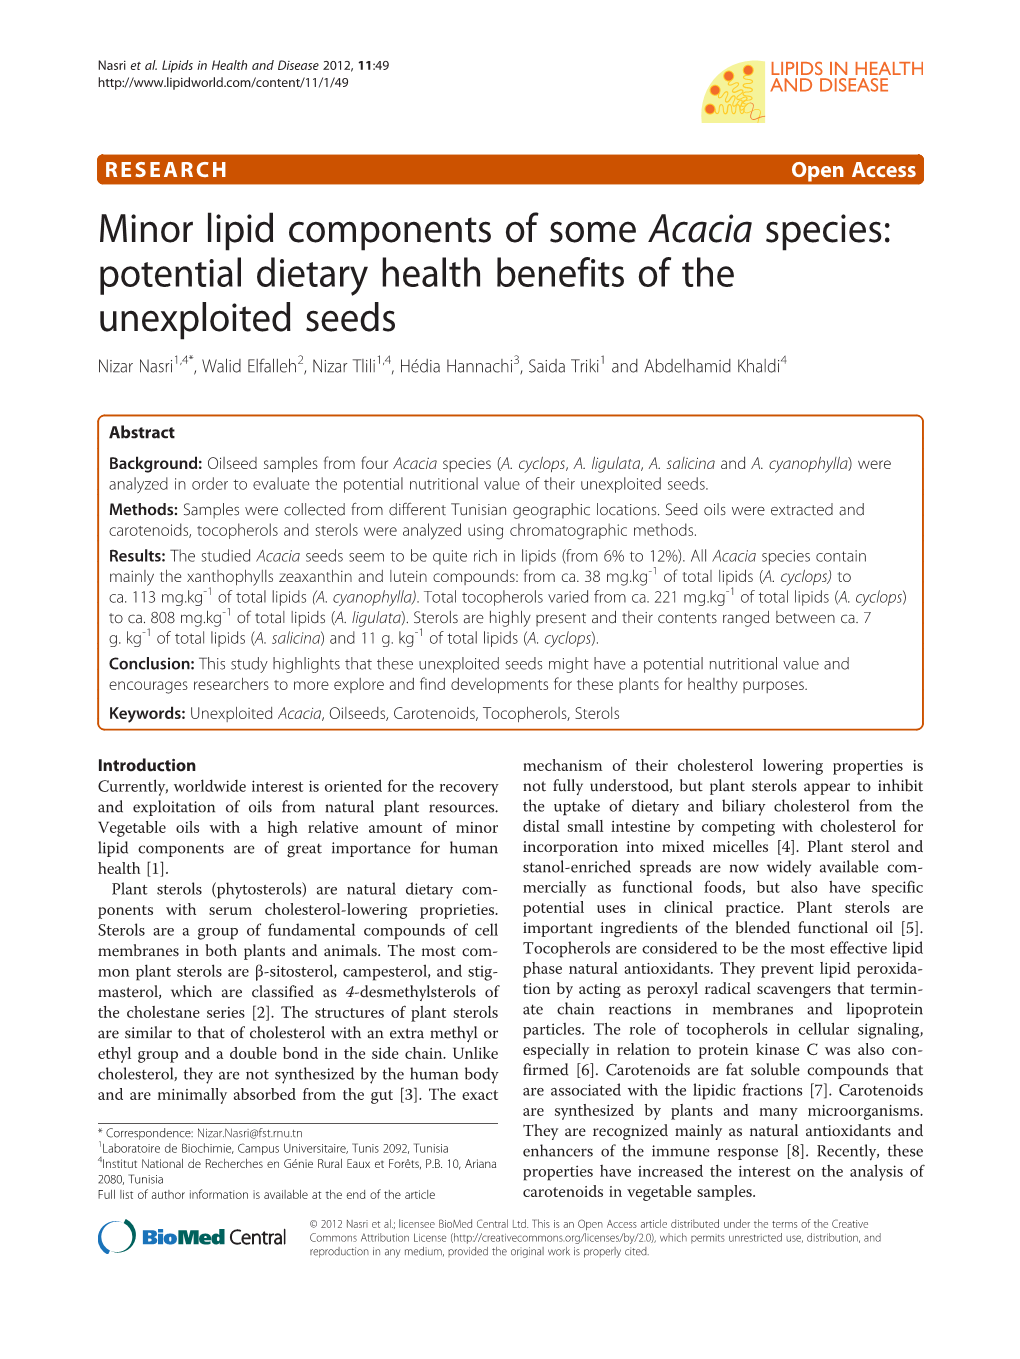 Minor Lipid Components of Some Acacia Species: Potential Dietary